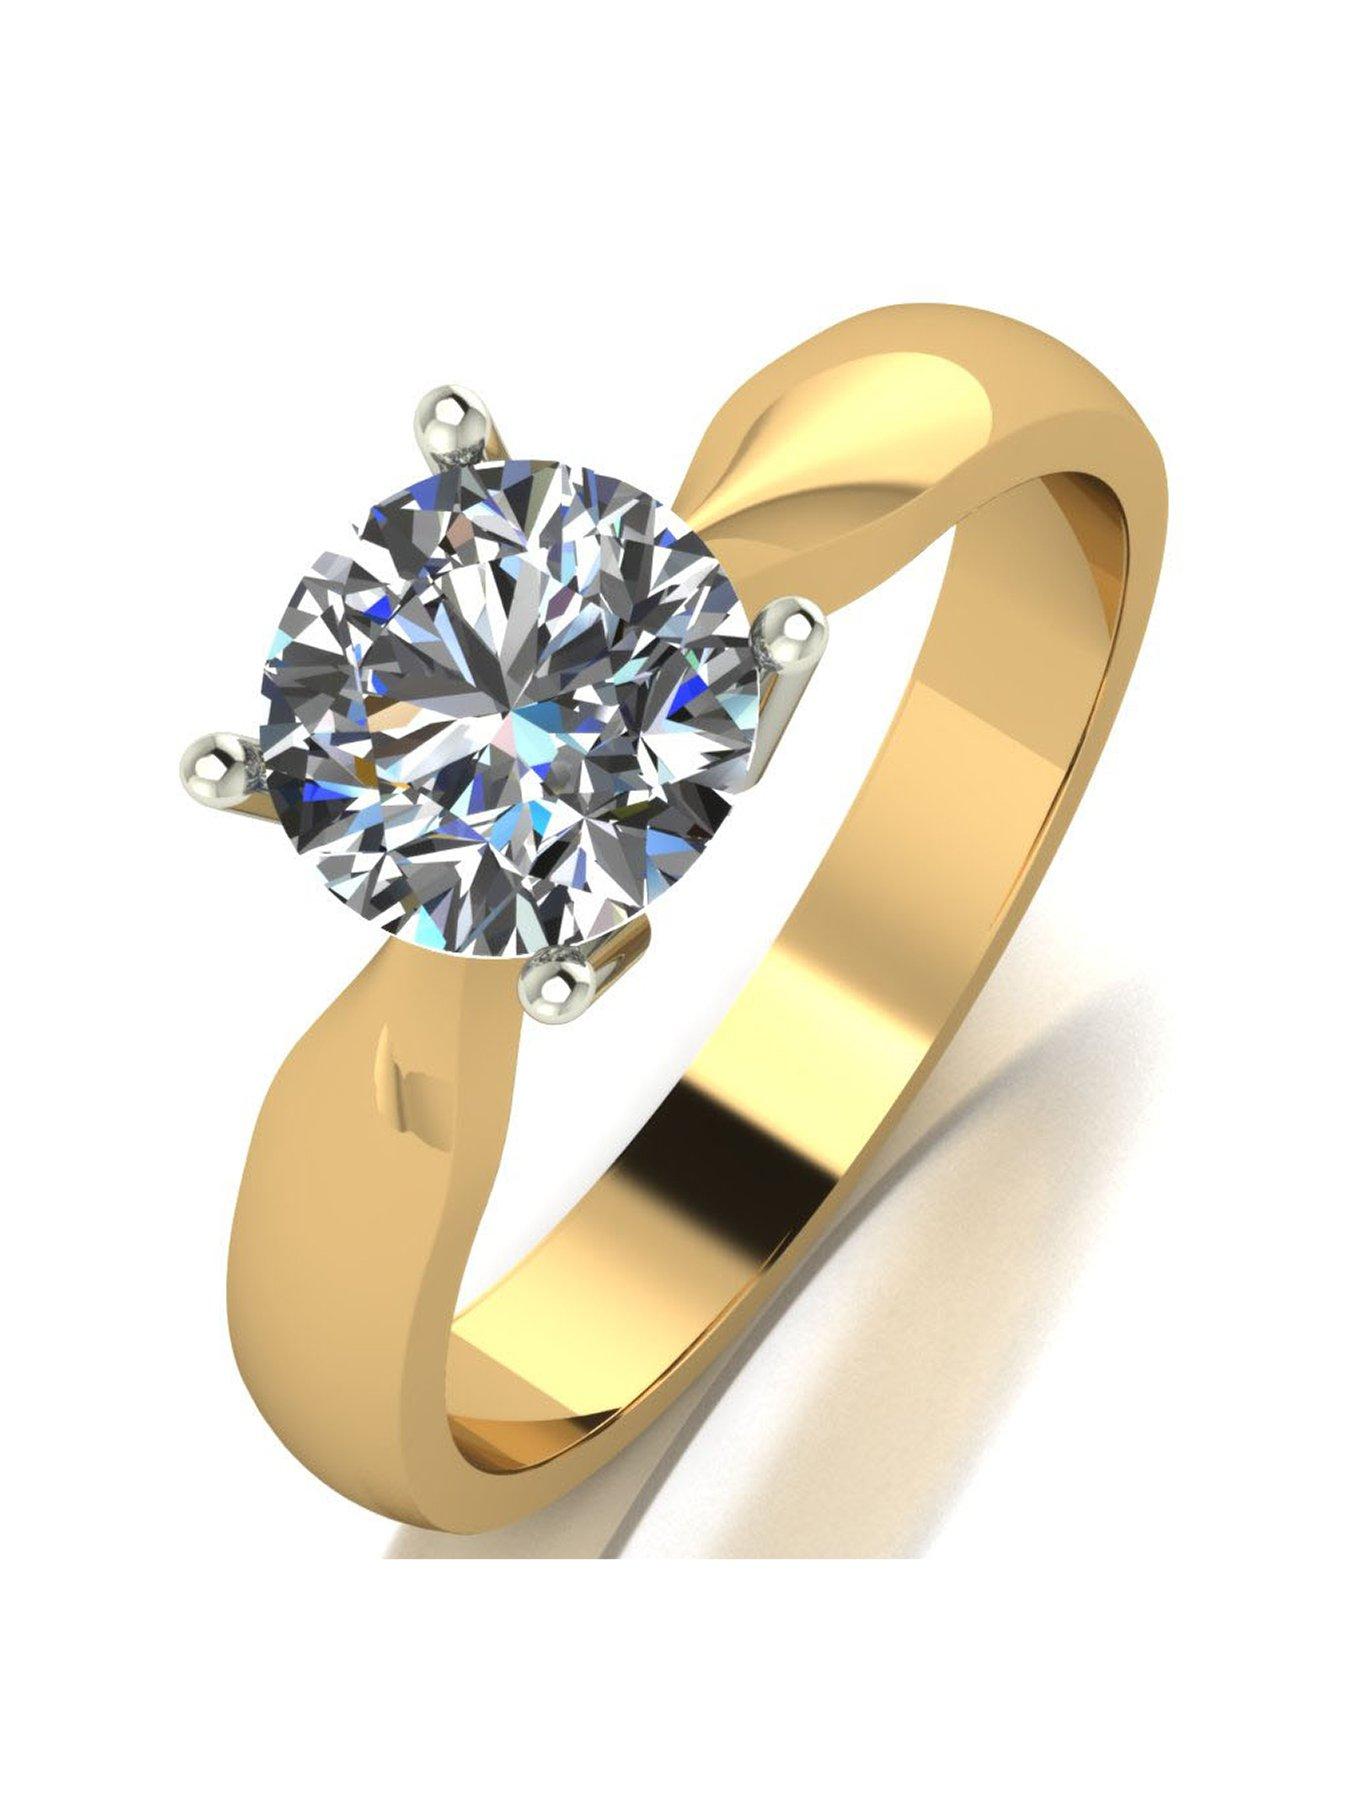  Moissanite 9ct Gold 1.25ct Solitaire Ring